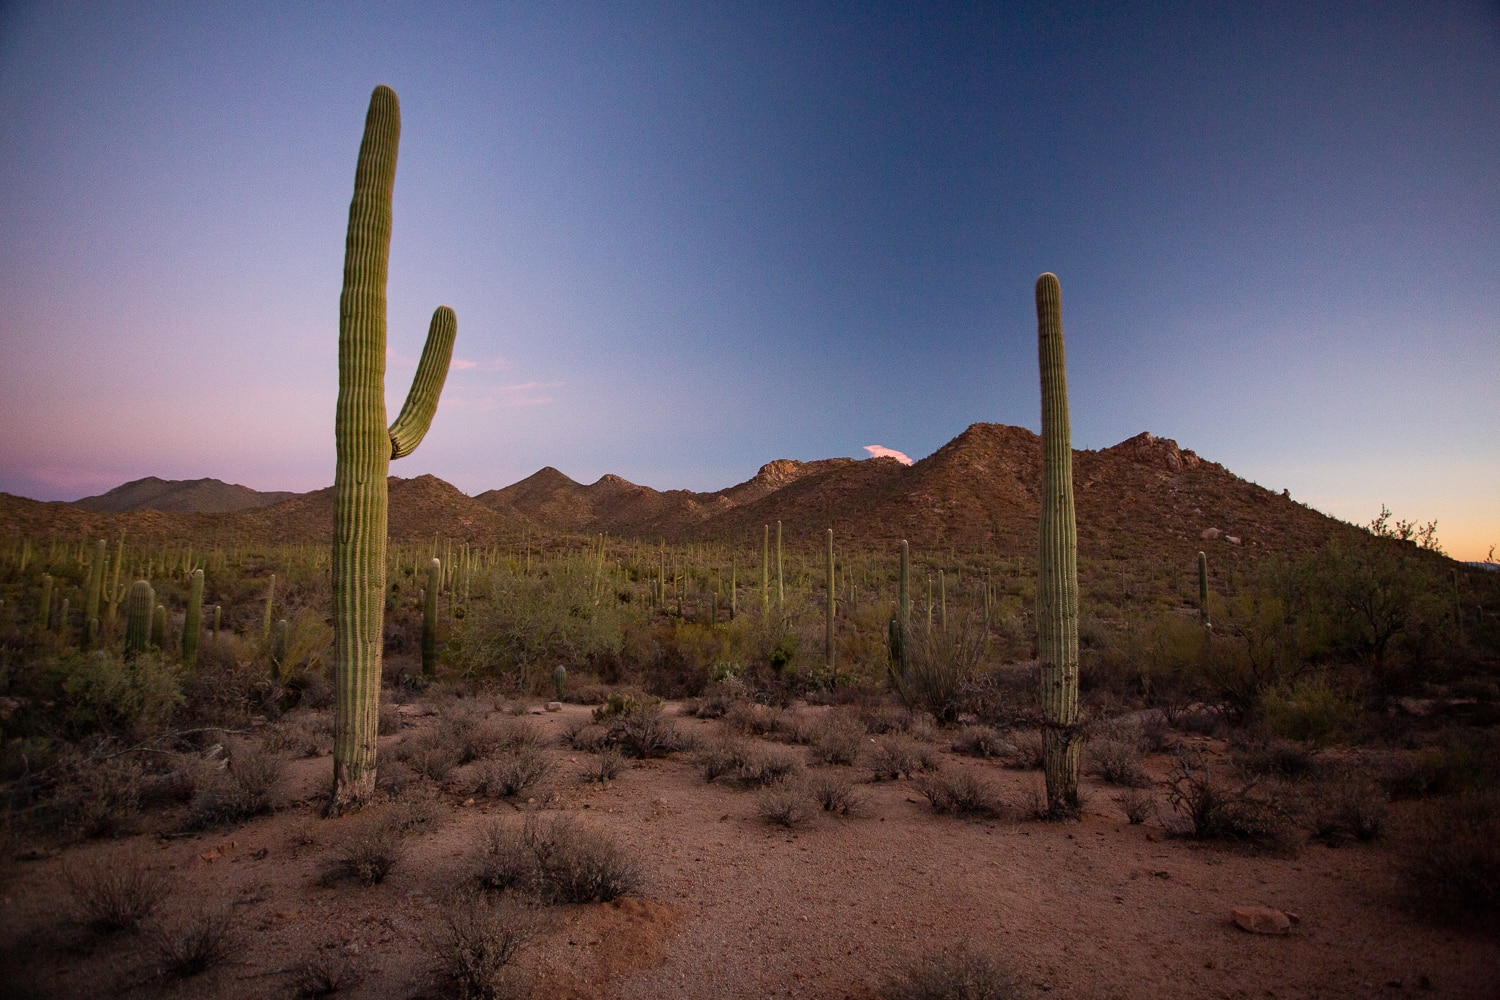 A sunset photo with pink and blue sky above two saguaro cactuses in Saguaro National Park